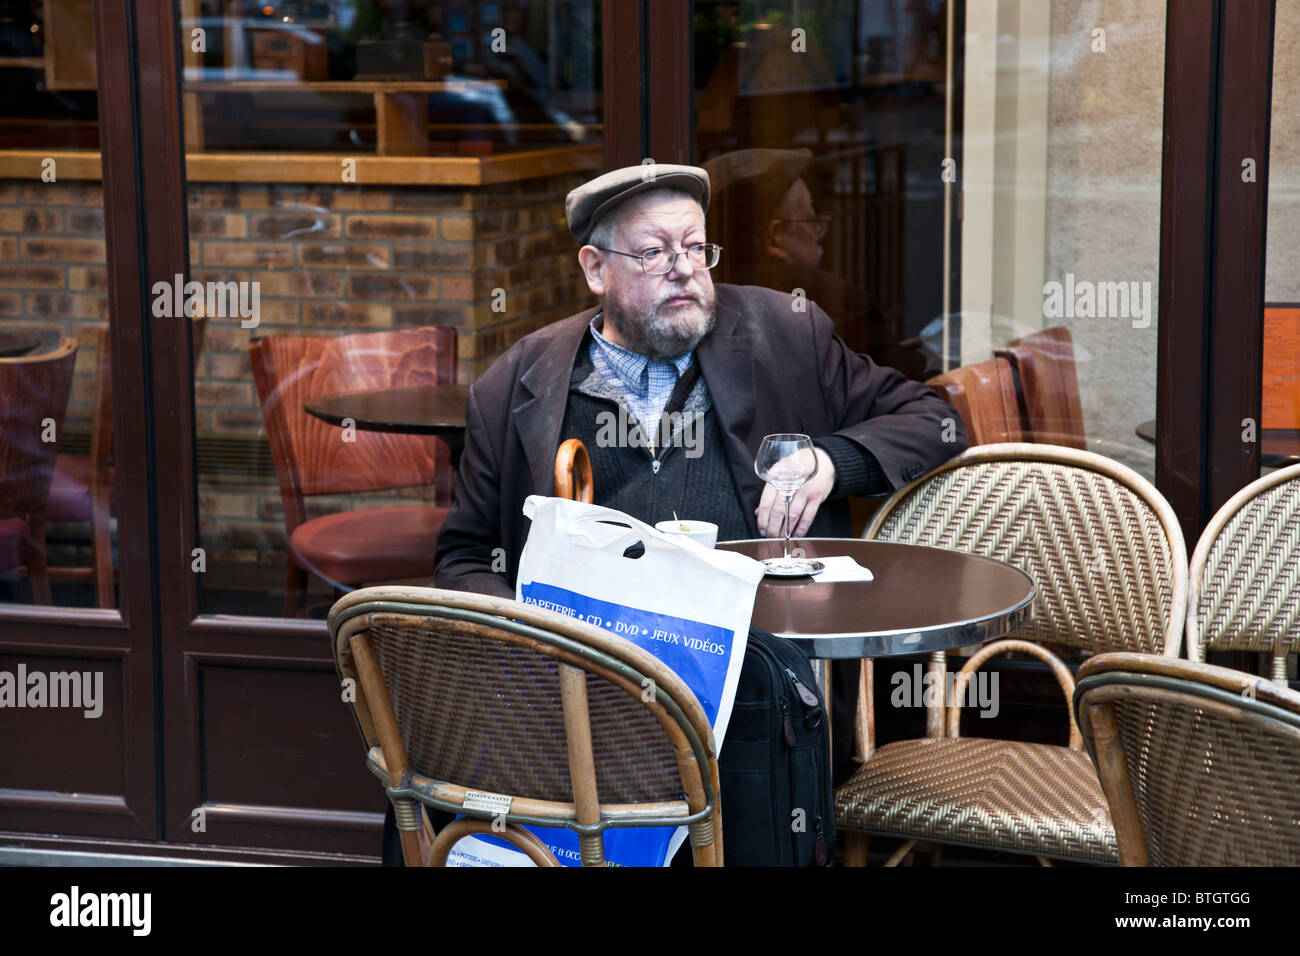 intellectual looking bearded middle aged French man enjoying glass of wine at cafe outdoor seating Boulevard Saint Germain Stock Photo